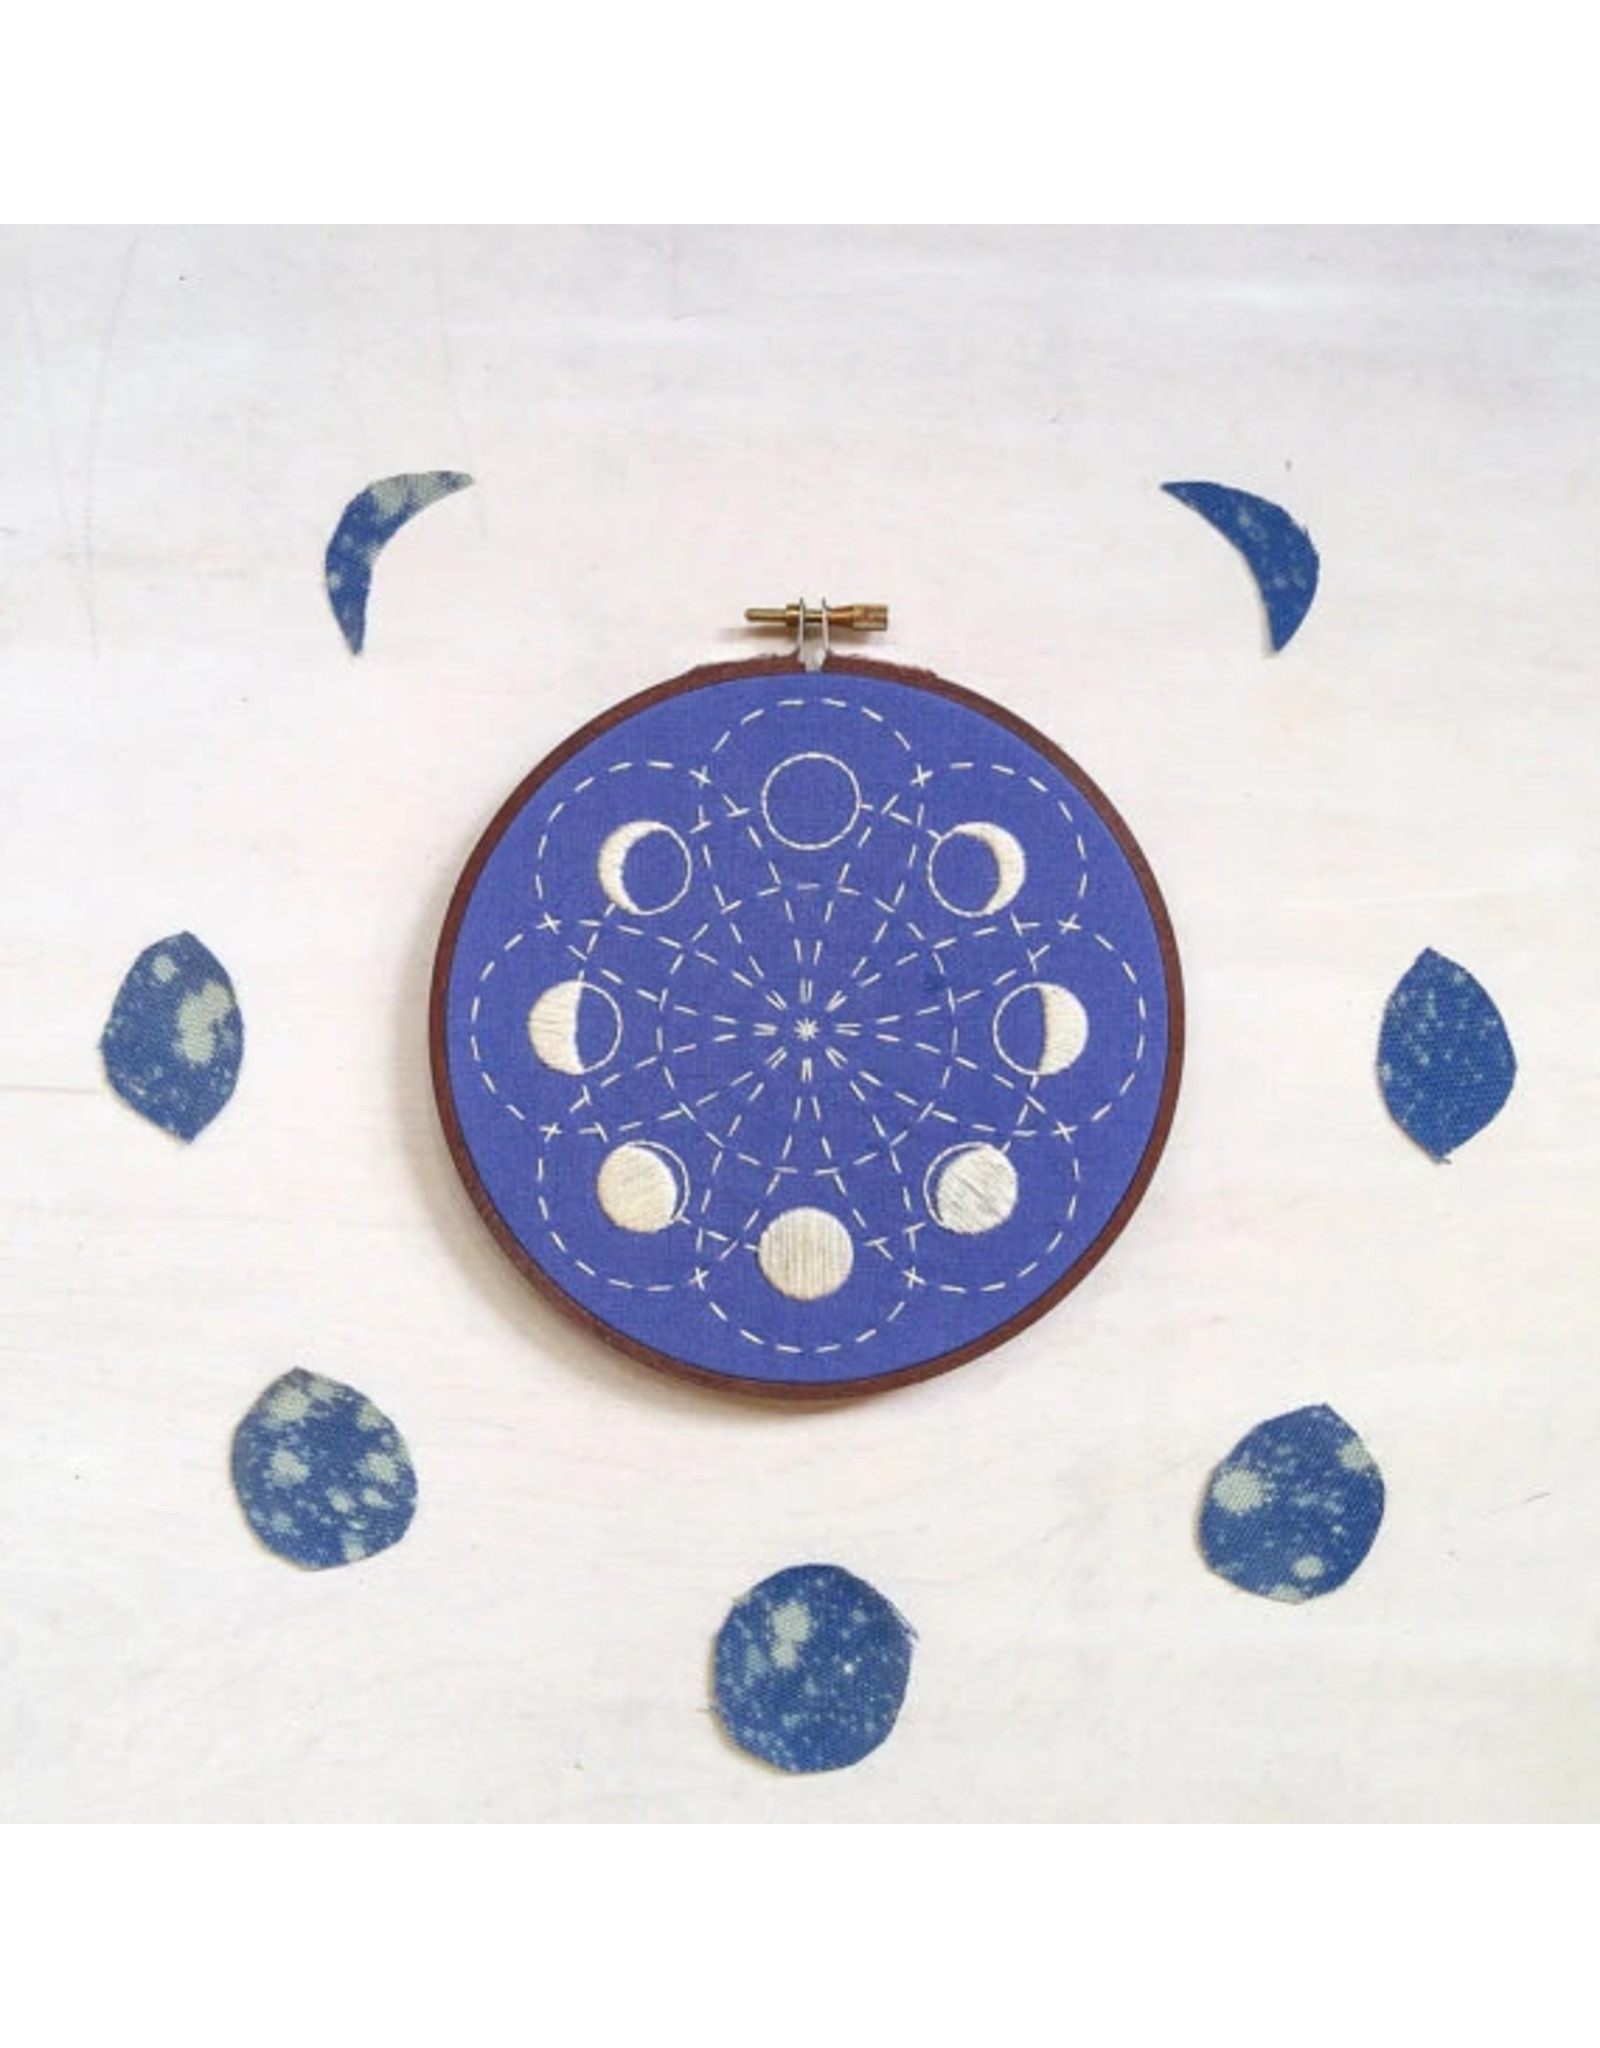 cozyblue Lunar Blossom Embroidery Kit from cozyblue